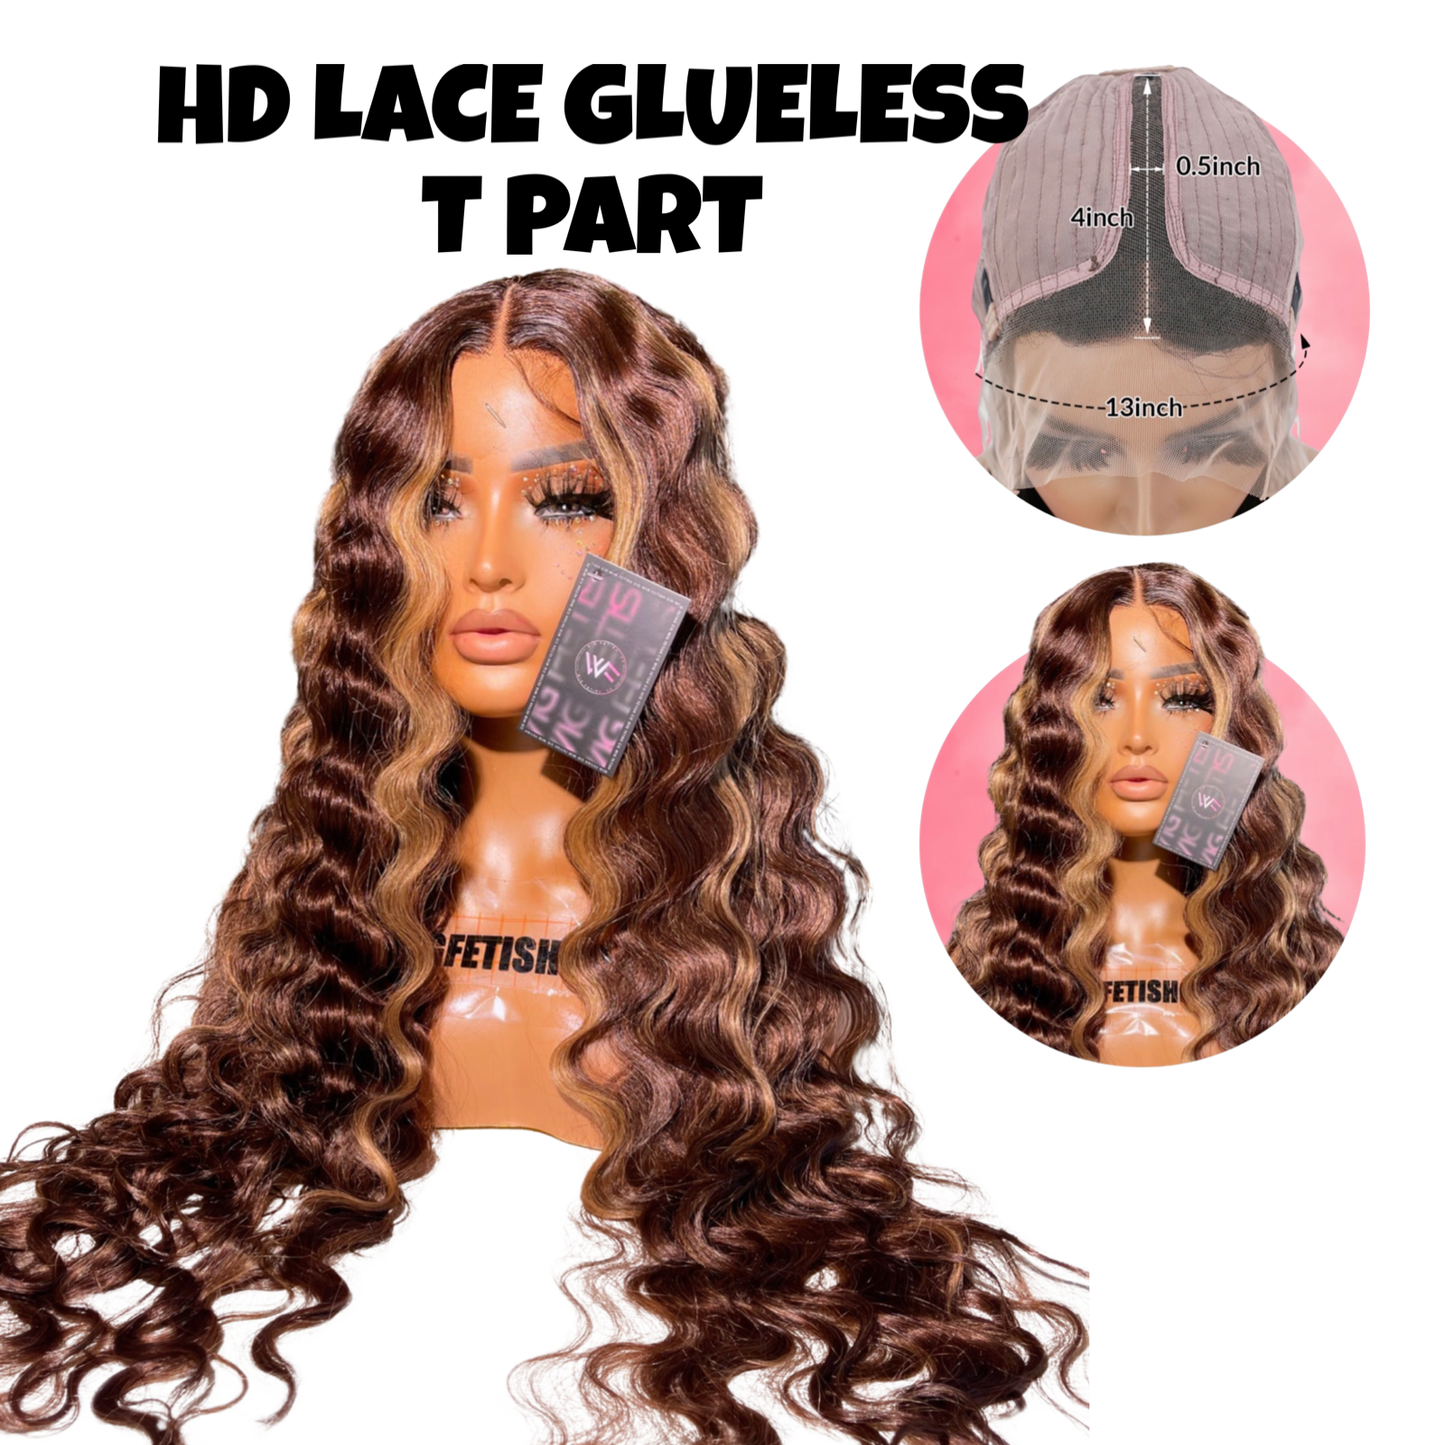 HD LACE 30 INCH T PART (GLUELESS) DEEP WAVE HIGHLIGHT 4/27